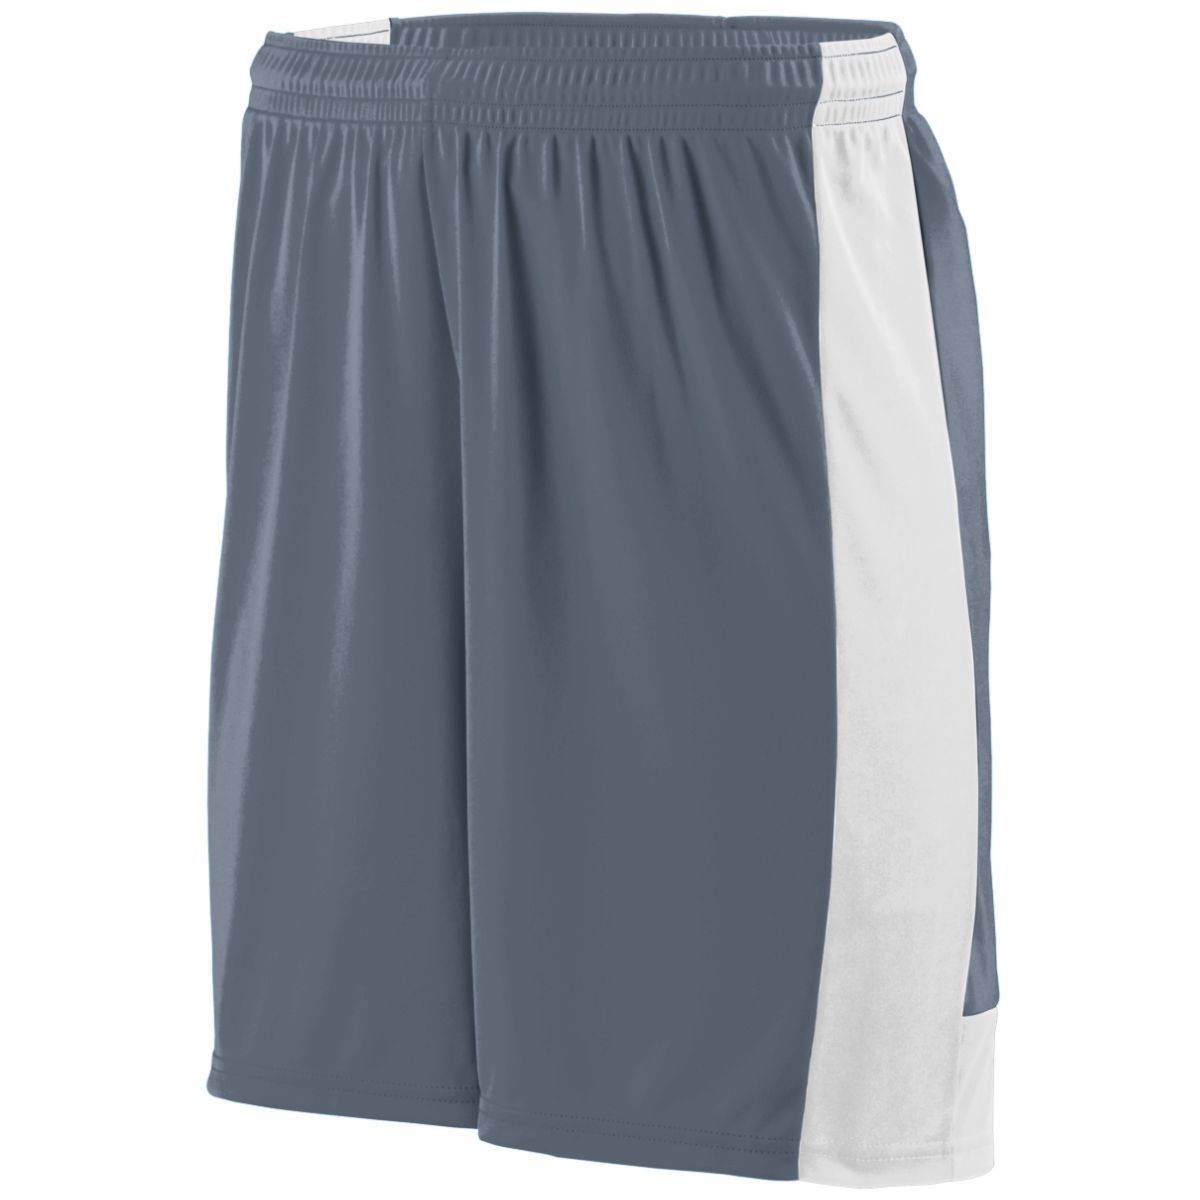 Augusta Sportswear Youth Lightning Shorts in Graphite/White  -Part of the Youth, Youth-Shorts, Augusta-Products, Soccer, All-Sports-1 product lines at KanaleyCreations.com